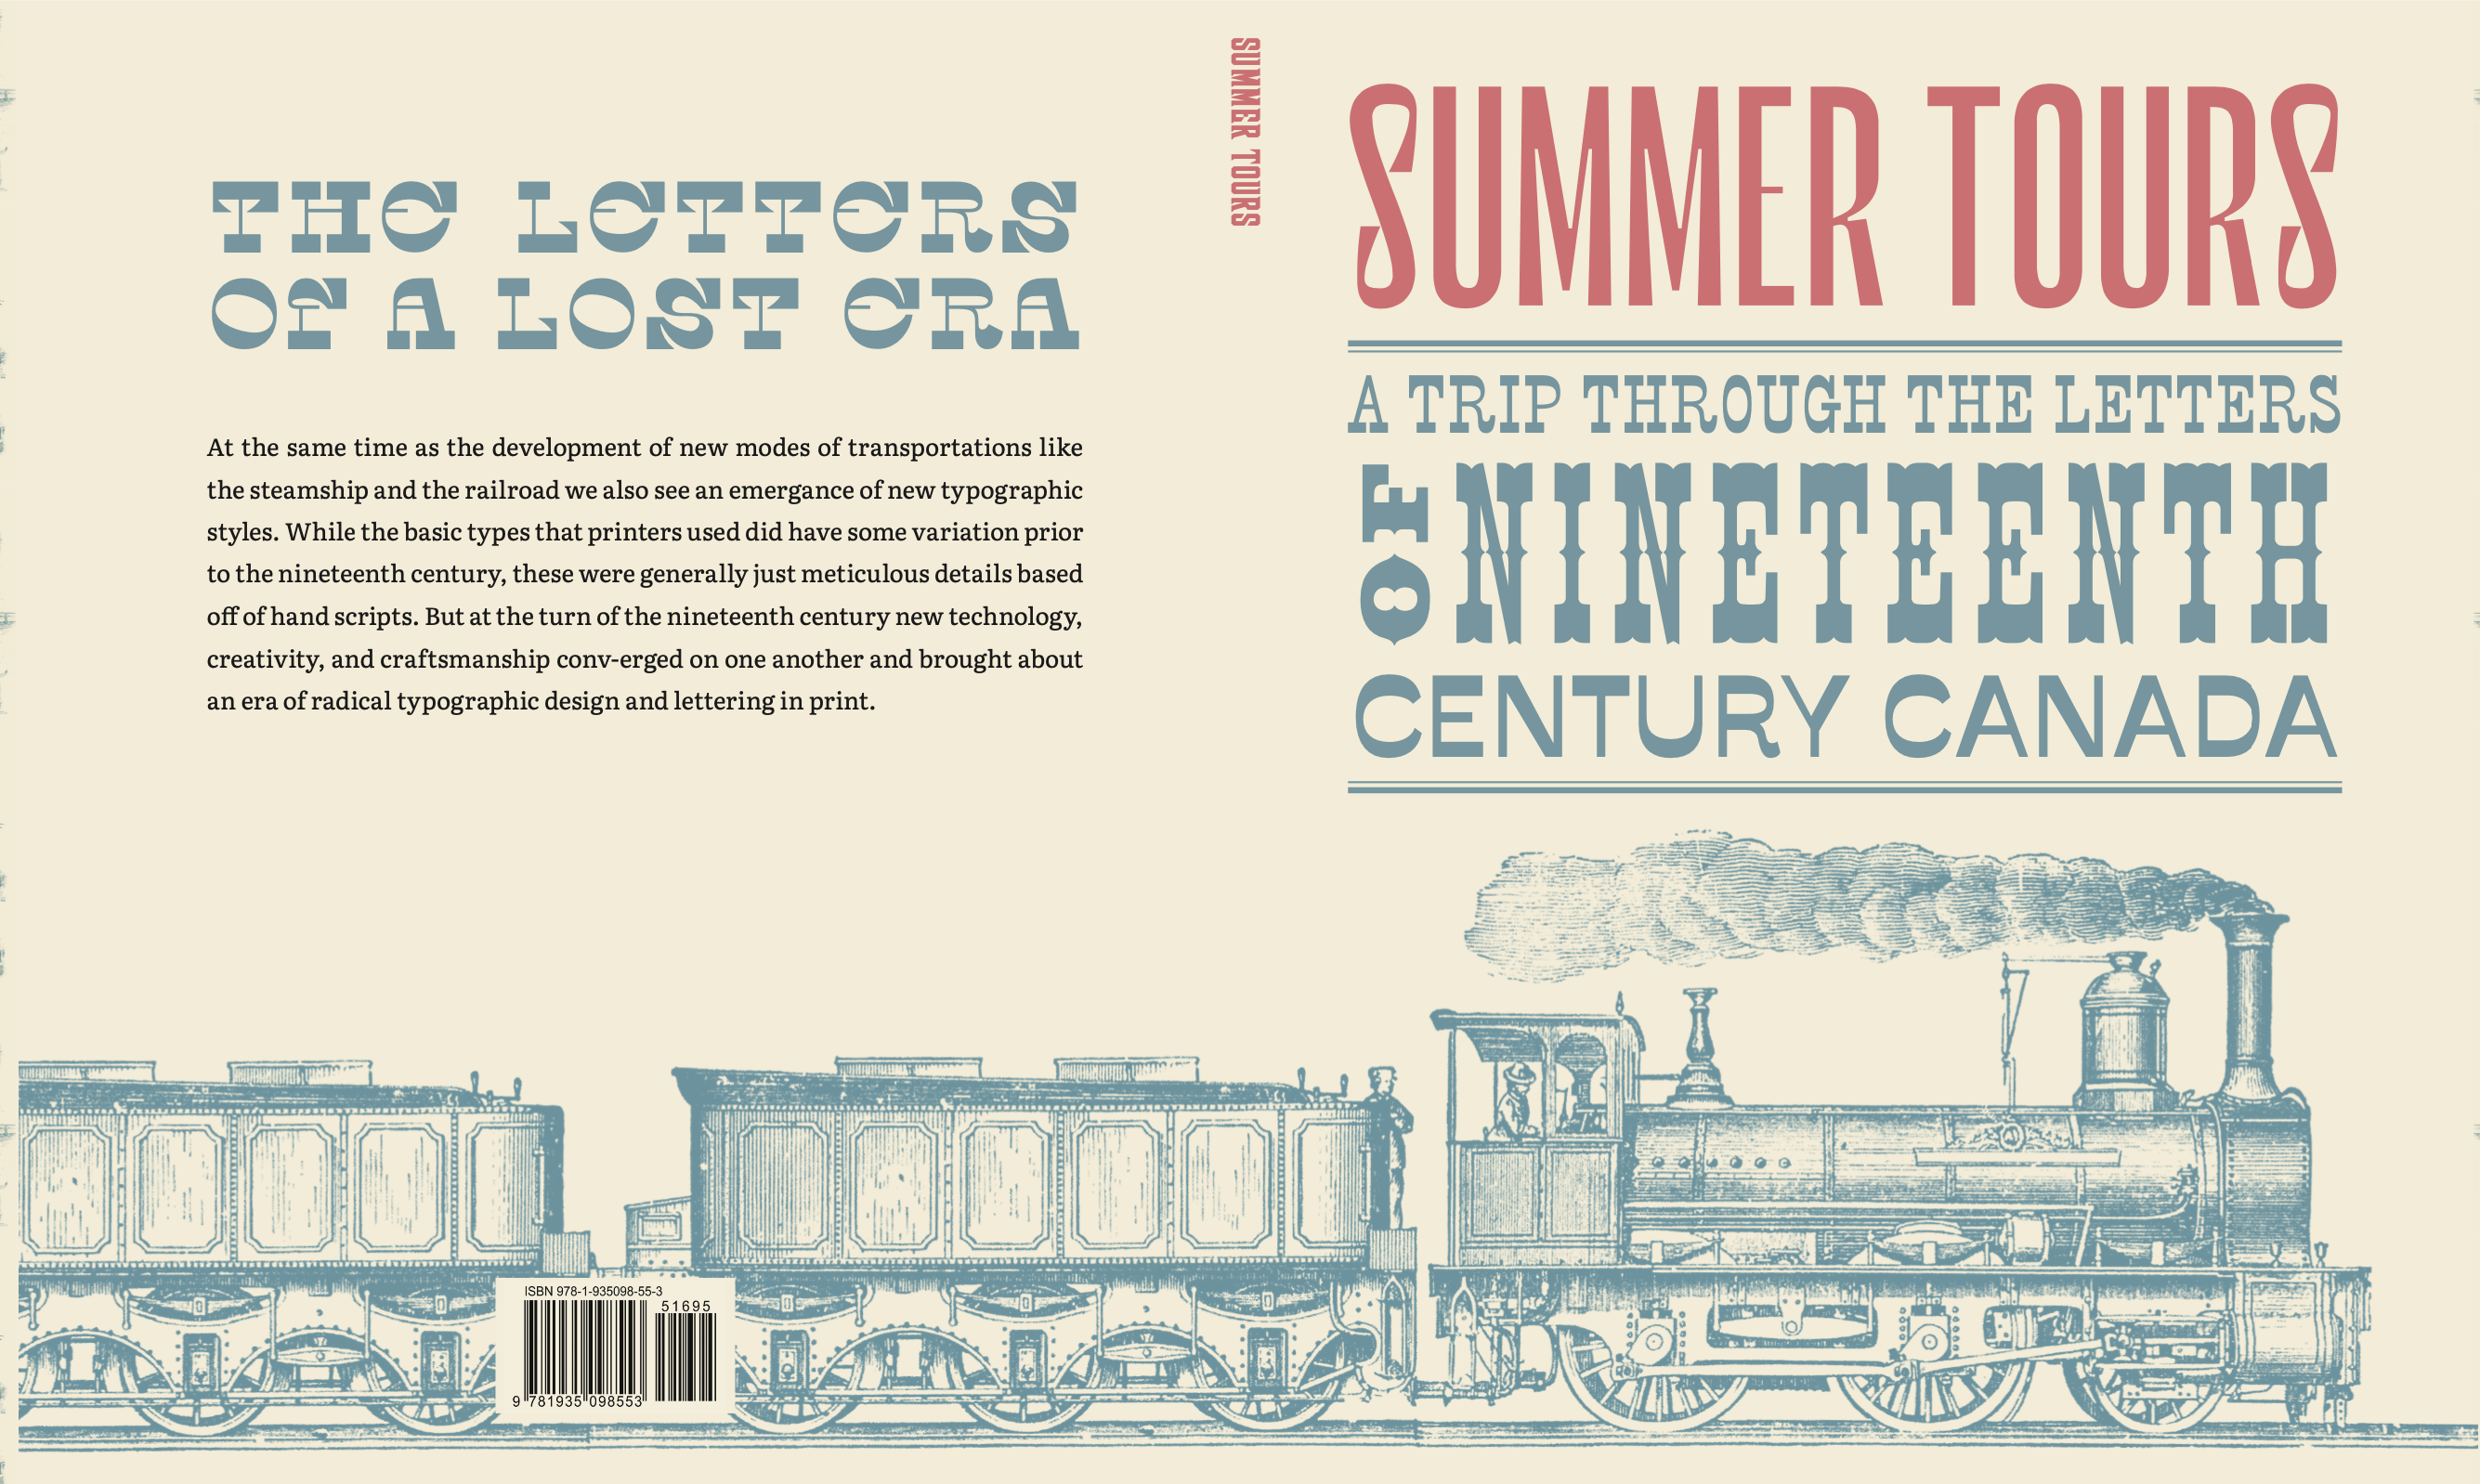 The front and back cover of the book Summer Tours featuring a wood block print of an old steam train